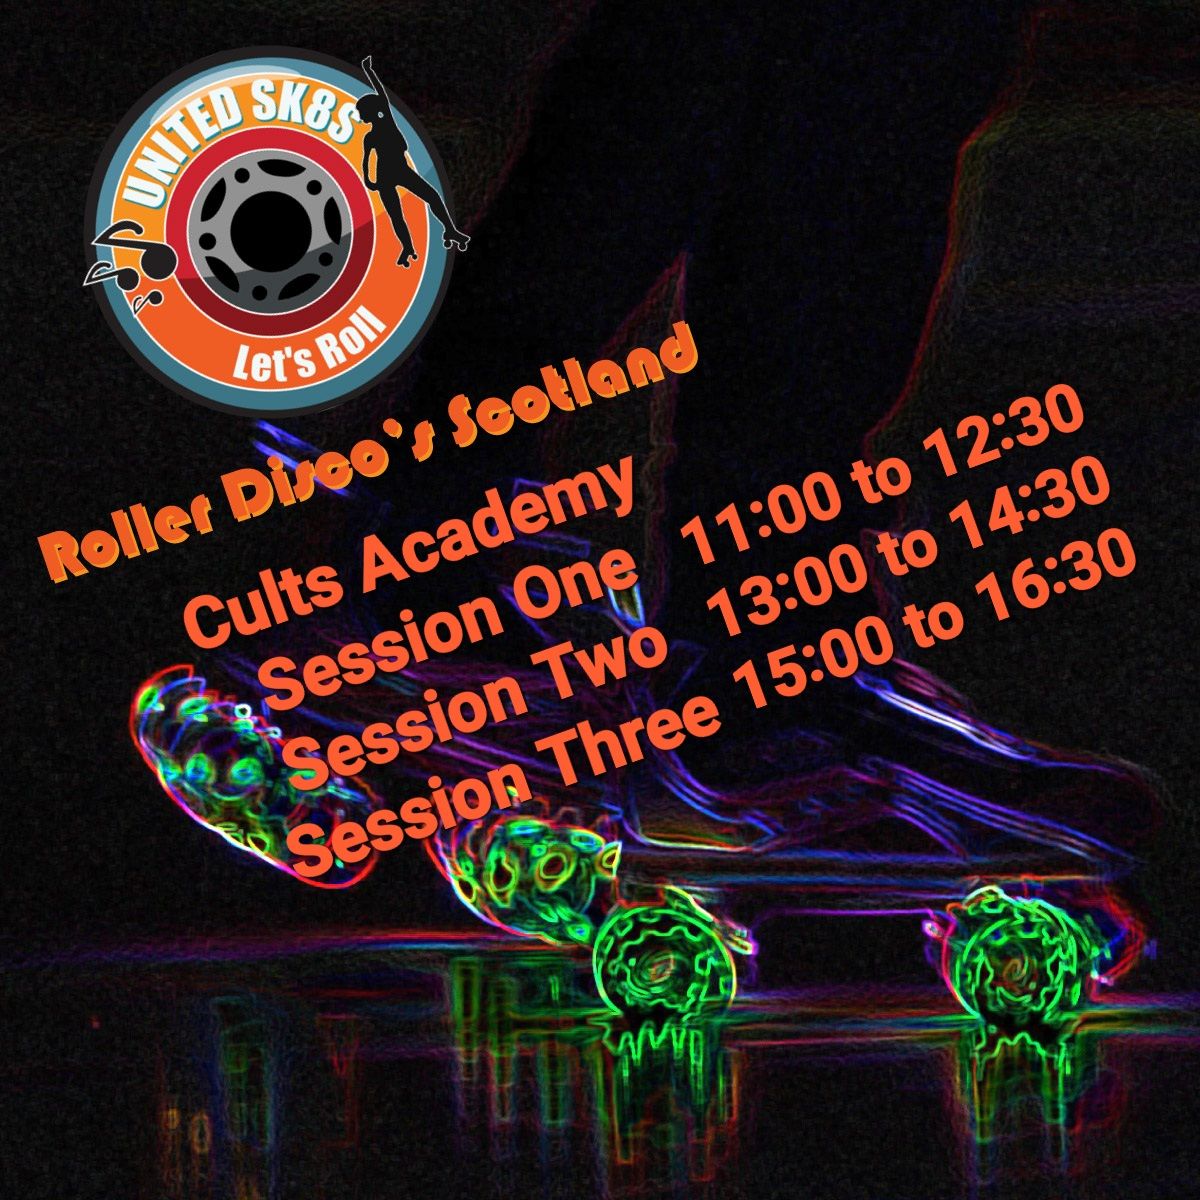 Aberdeen Family & Adult Roller Disco Session Two